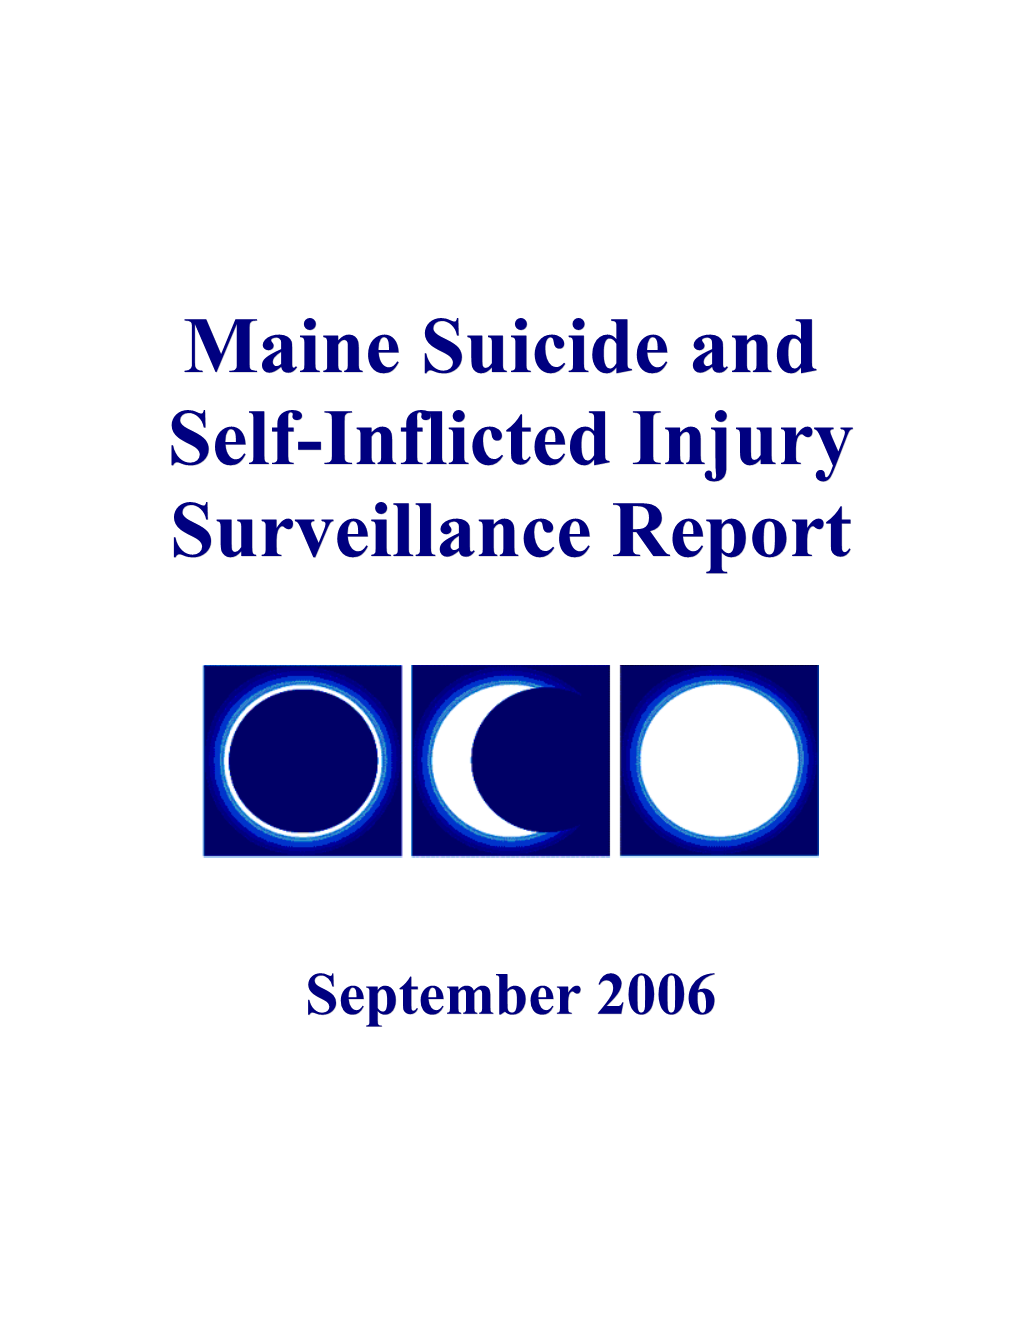 Self-Inflicted Injury Surveillance Report